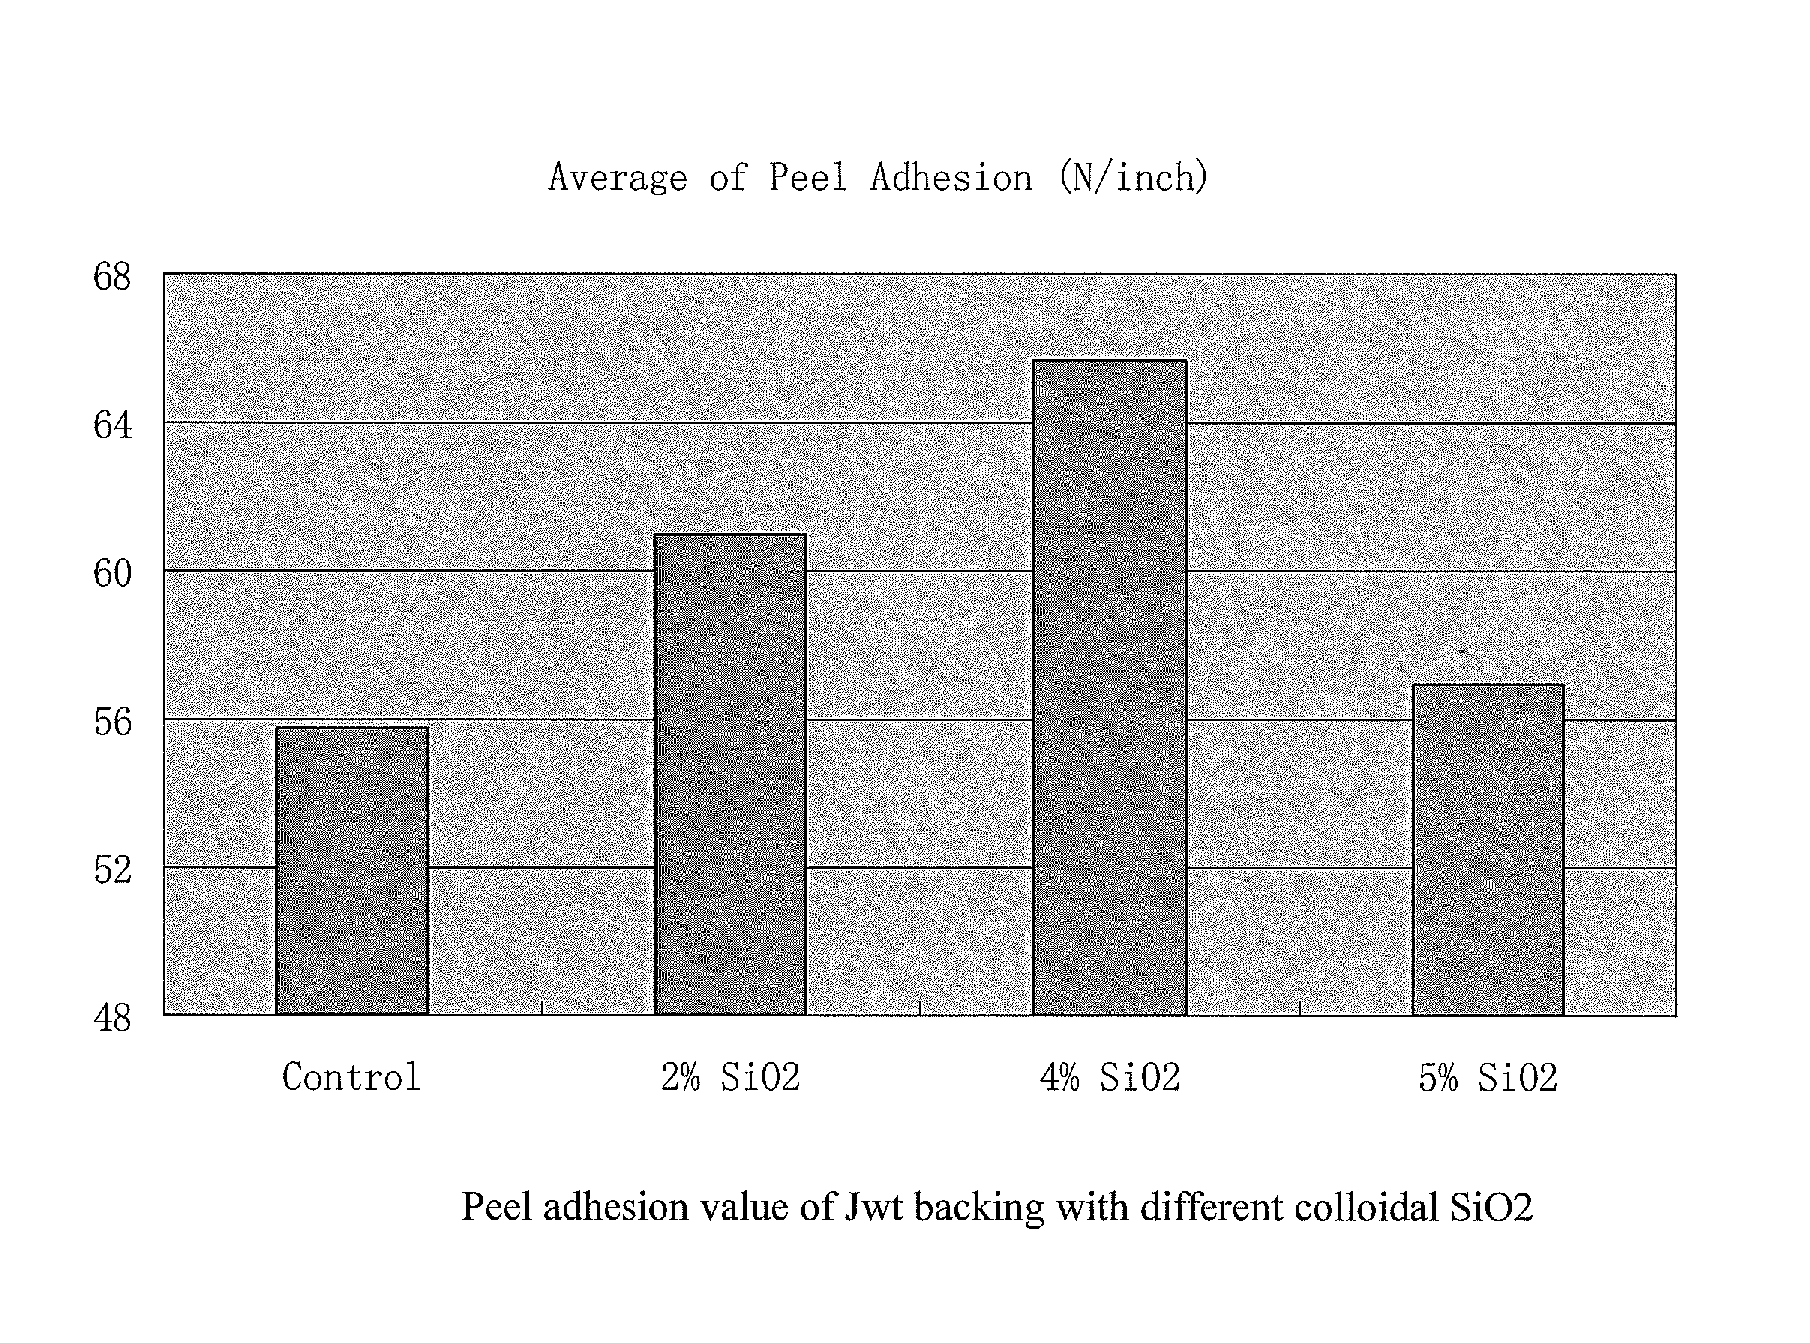 Coated abrasive backings with cloth treated with colloidal silicon oxide